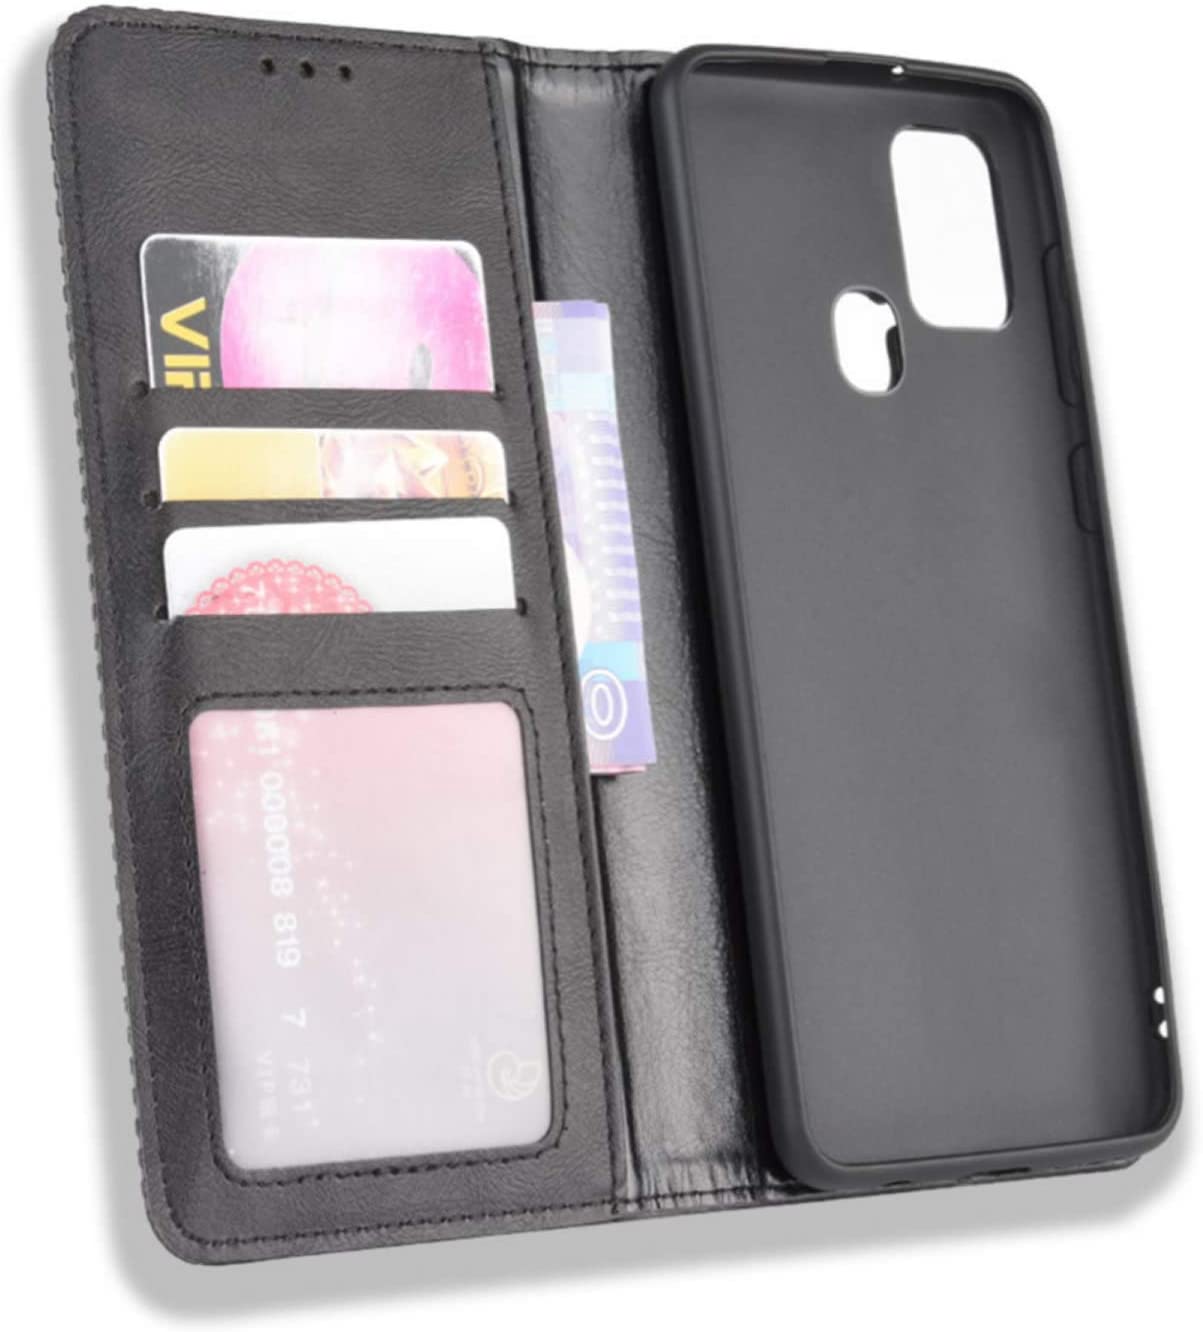 Samsung Galaxy A21s wallet flip cover case with soft tpu inner cover 